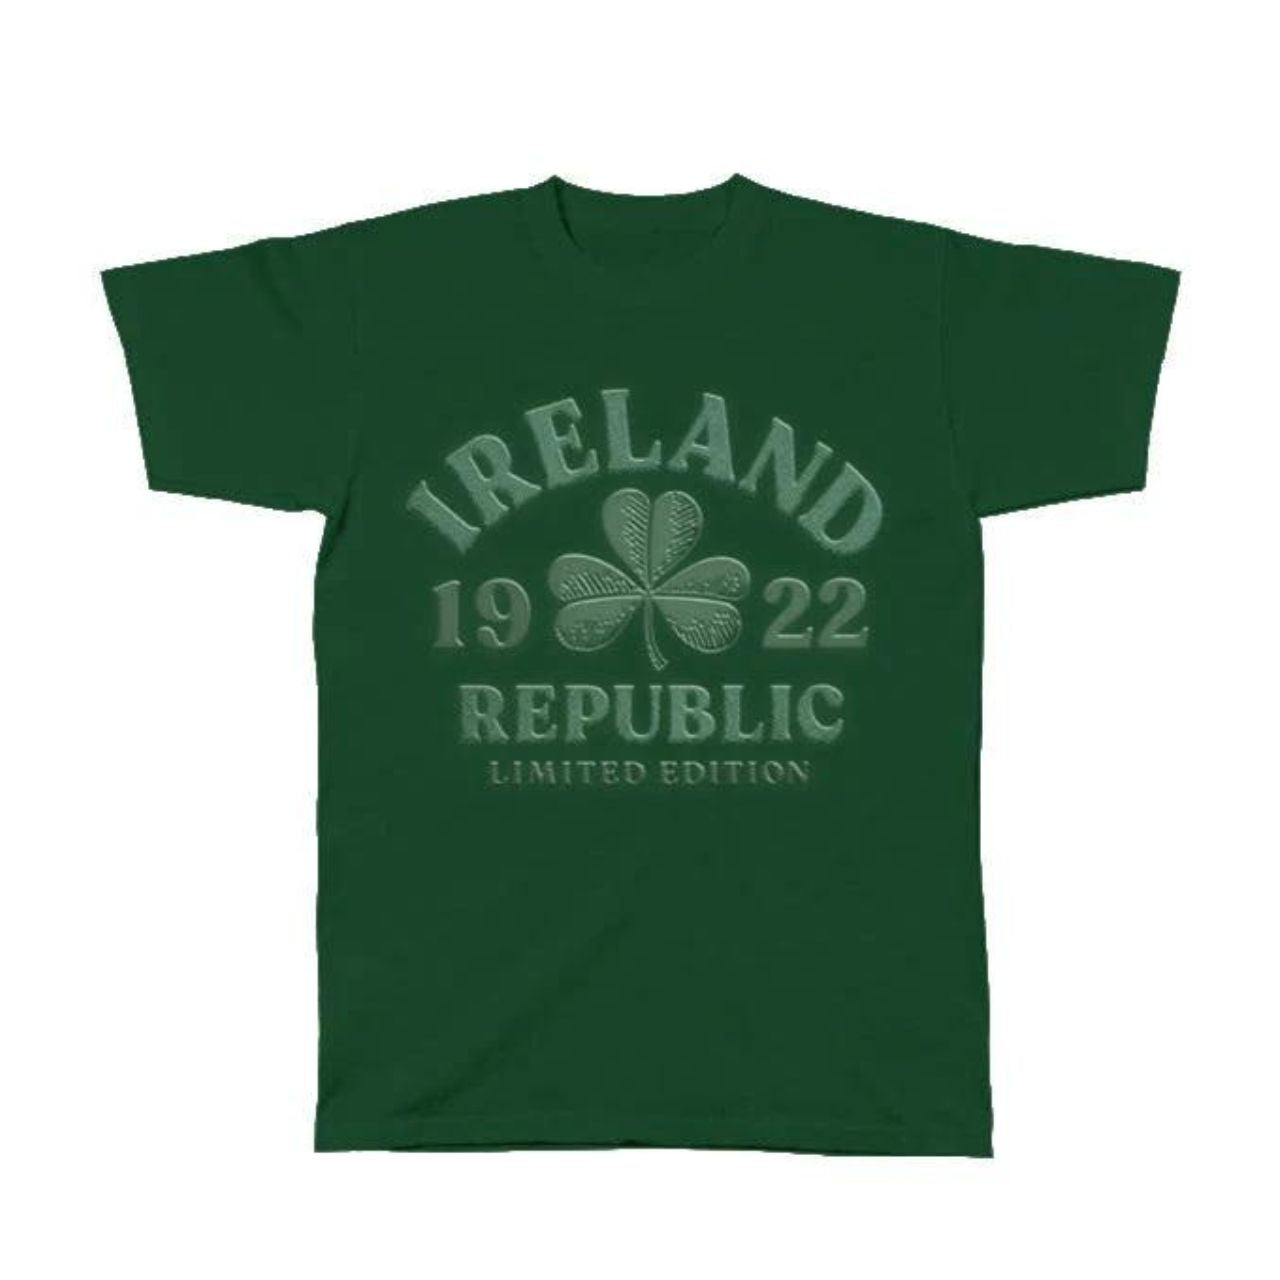 Cara Craft Ireland Bottle Green Embossed 1922 T-Shirt  - 100% cotton - Ash 99% cotton,1% polyester - Heather Grey 97% cotton, 3% polyester - Crew Neck - Designed And Printed in Ireland By Cara craft - Machine Washable